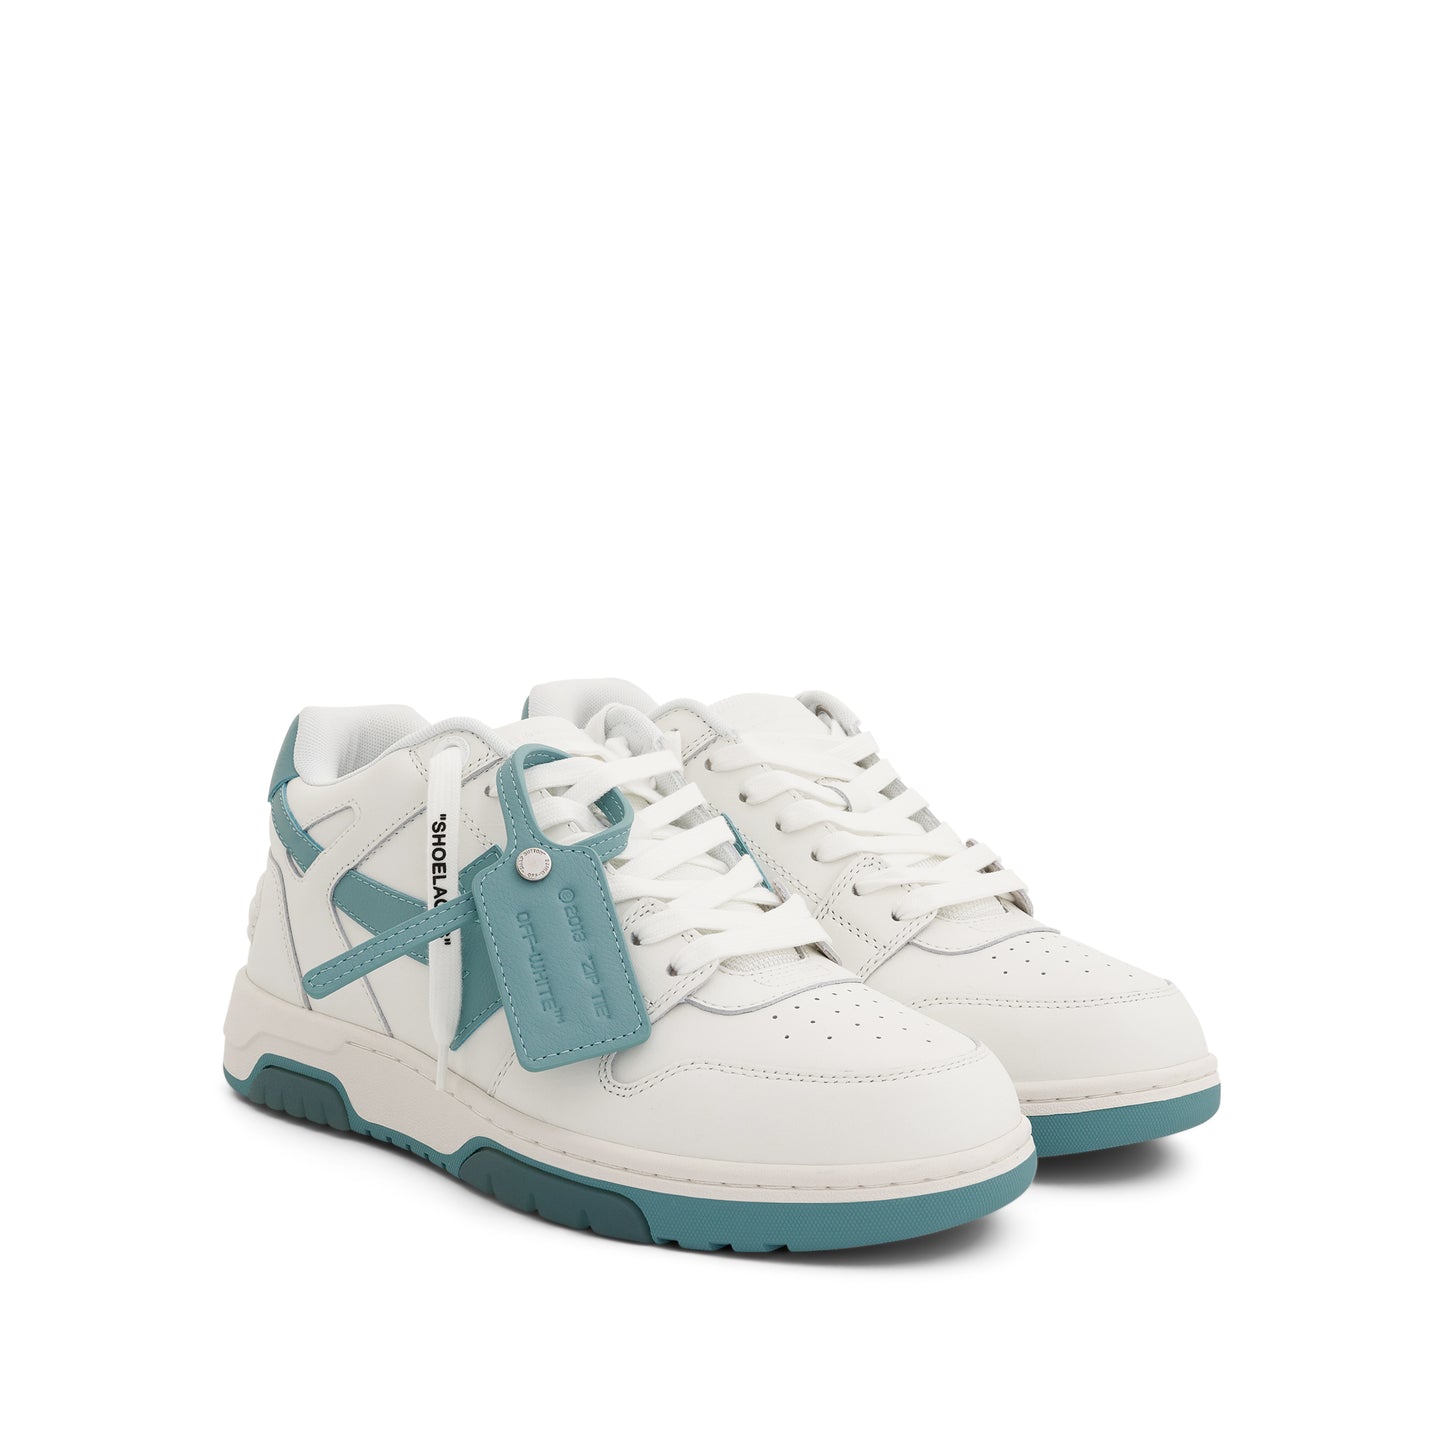 Out Of Office Calf Leather Sneaker in White/Celadon